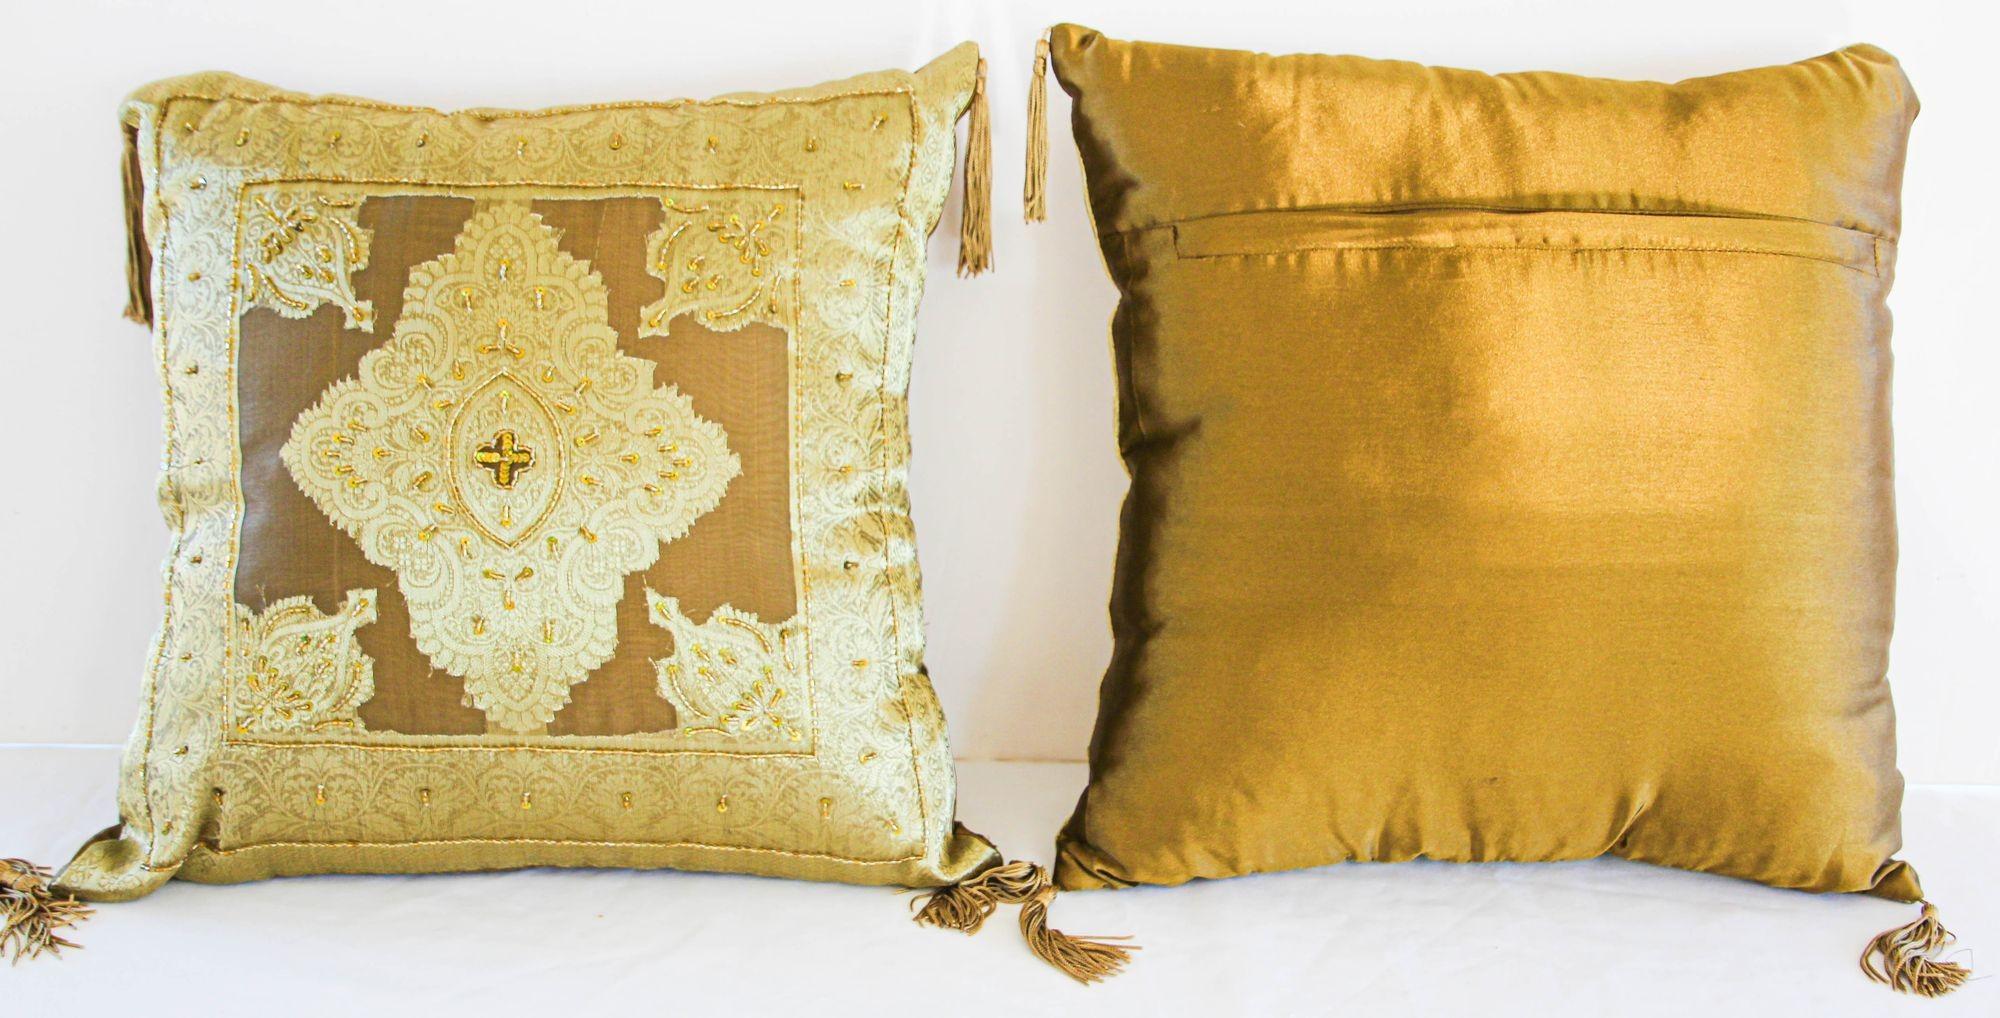 Gold Moorish throw Pillows Embellished with Sequins and Beads a Pair.
Two Moorish throw decorative accent rich gold bronze pillows embroidered and embellished with sequins with metallic threads, gold beads embroidery on gold silk damask, with gold